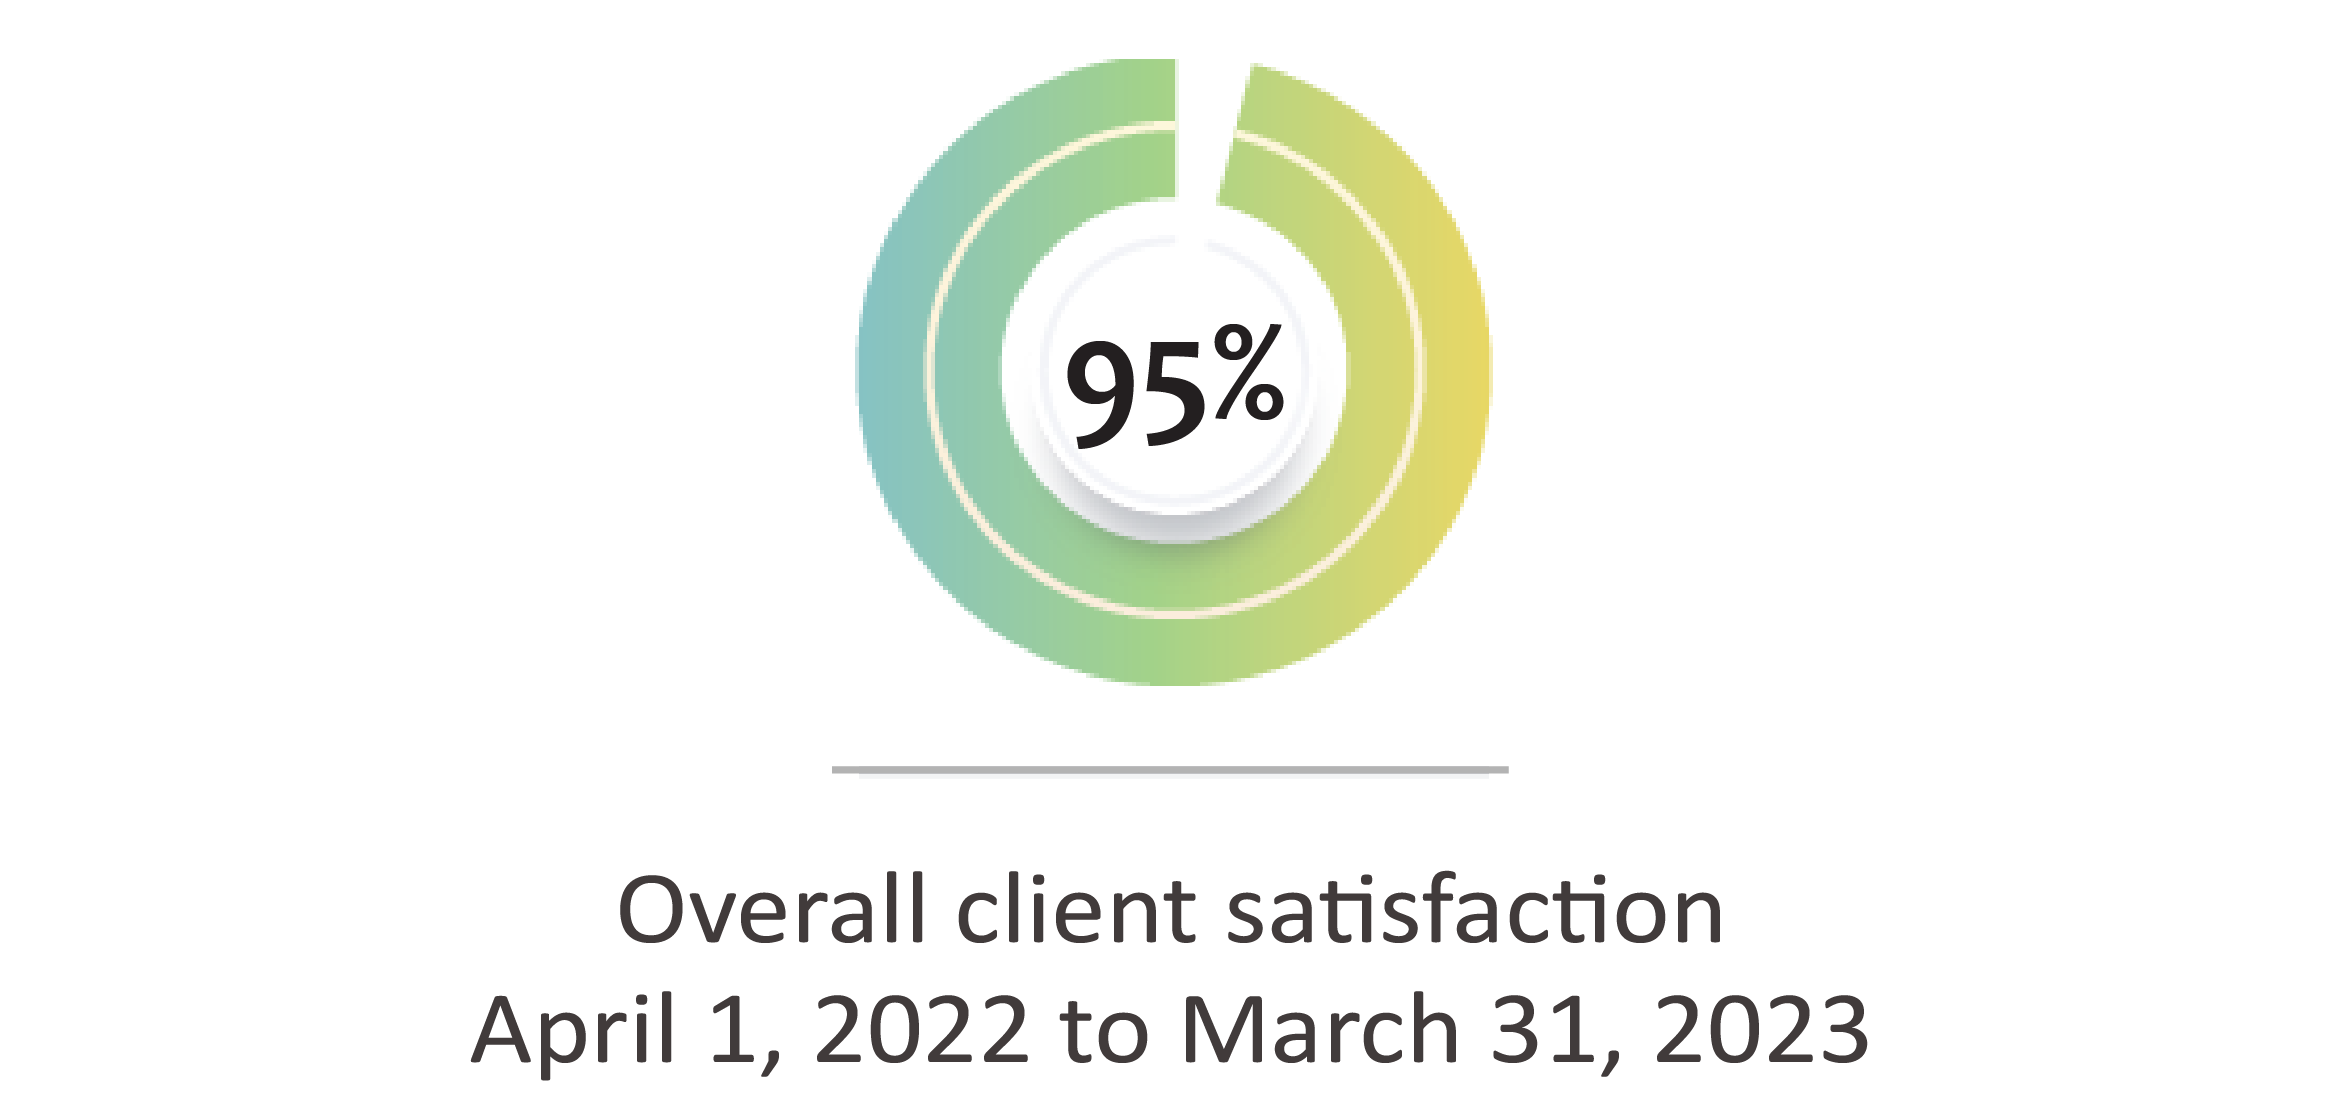 Overall client satisfaction - April 1, 2022 to March 31, 2023: 95%